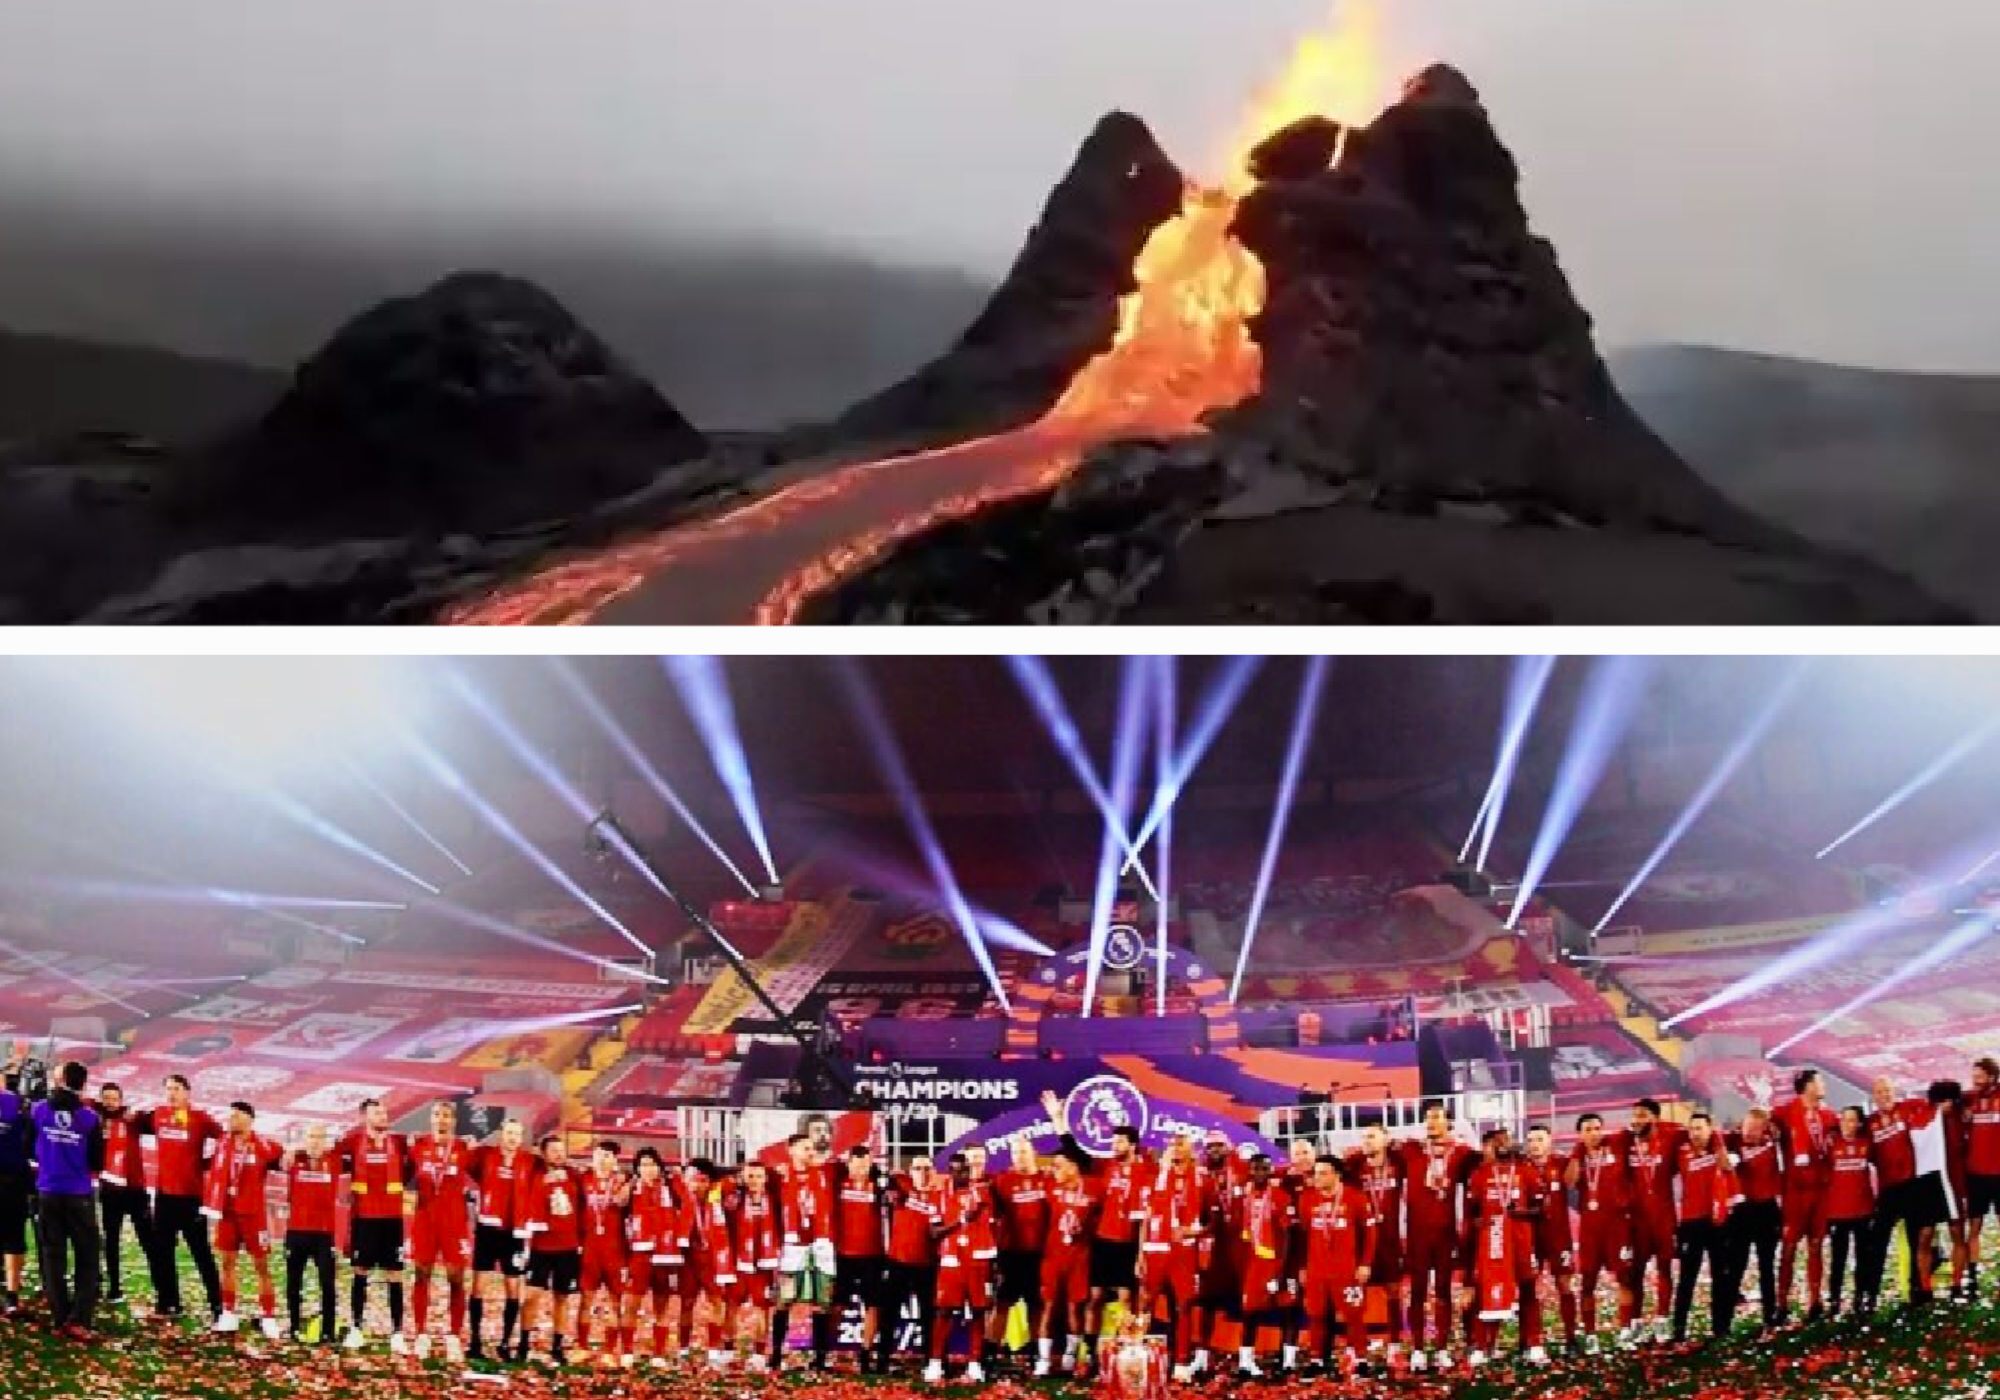 Drone pilot compares Iceland’s volcanic eruption to Liverpool title win